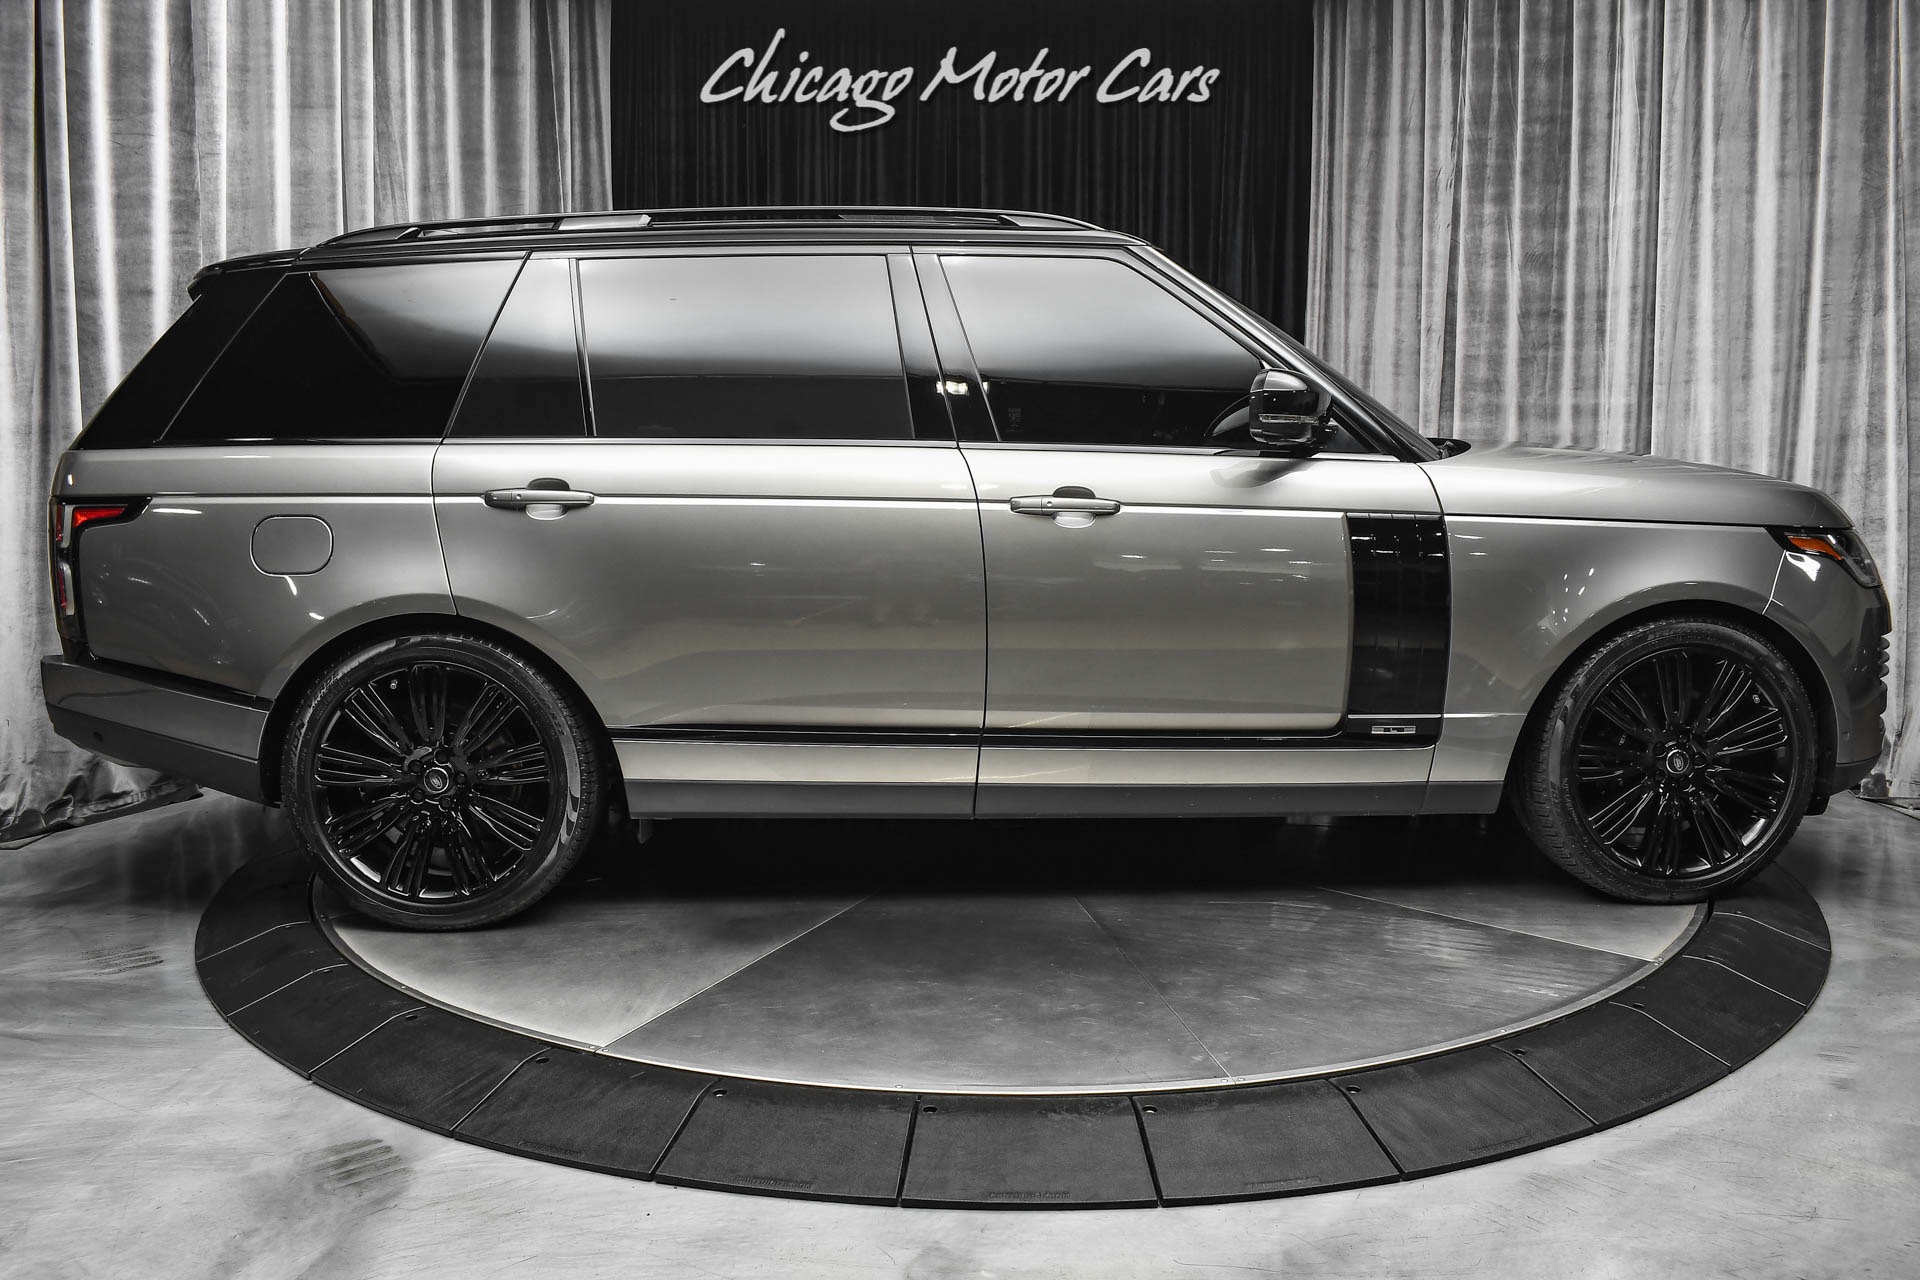 Used-2021-Land-Rover-Range-Rover-P525-Westminster-Edition-LWB-SUV-HUGE-MSRP-Super-Luxurious-LOADED